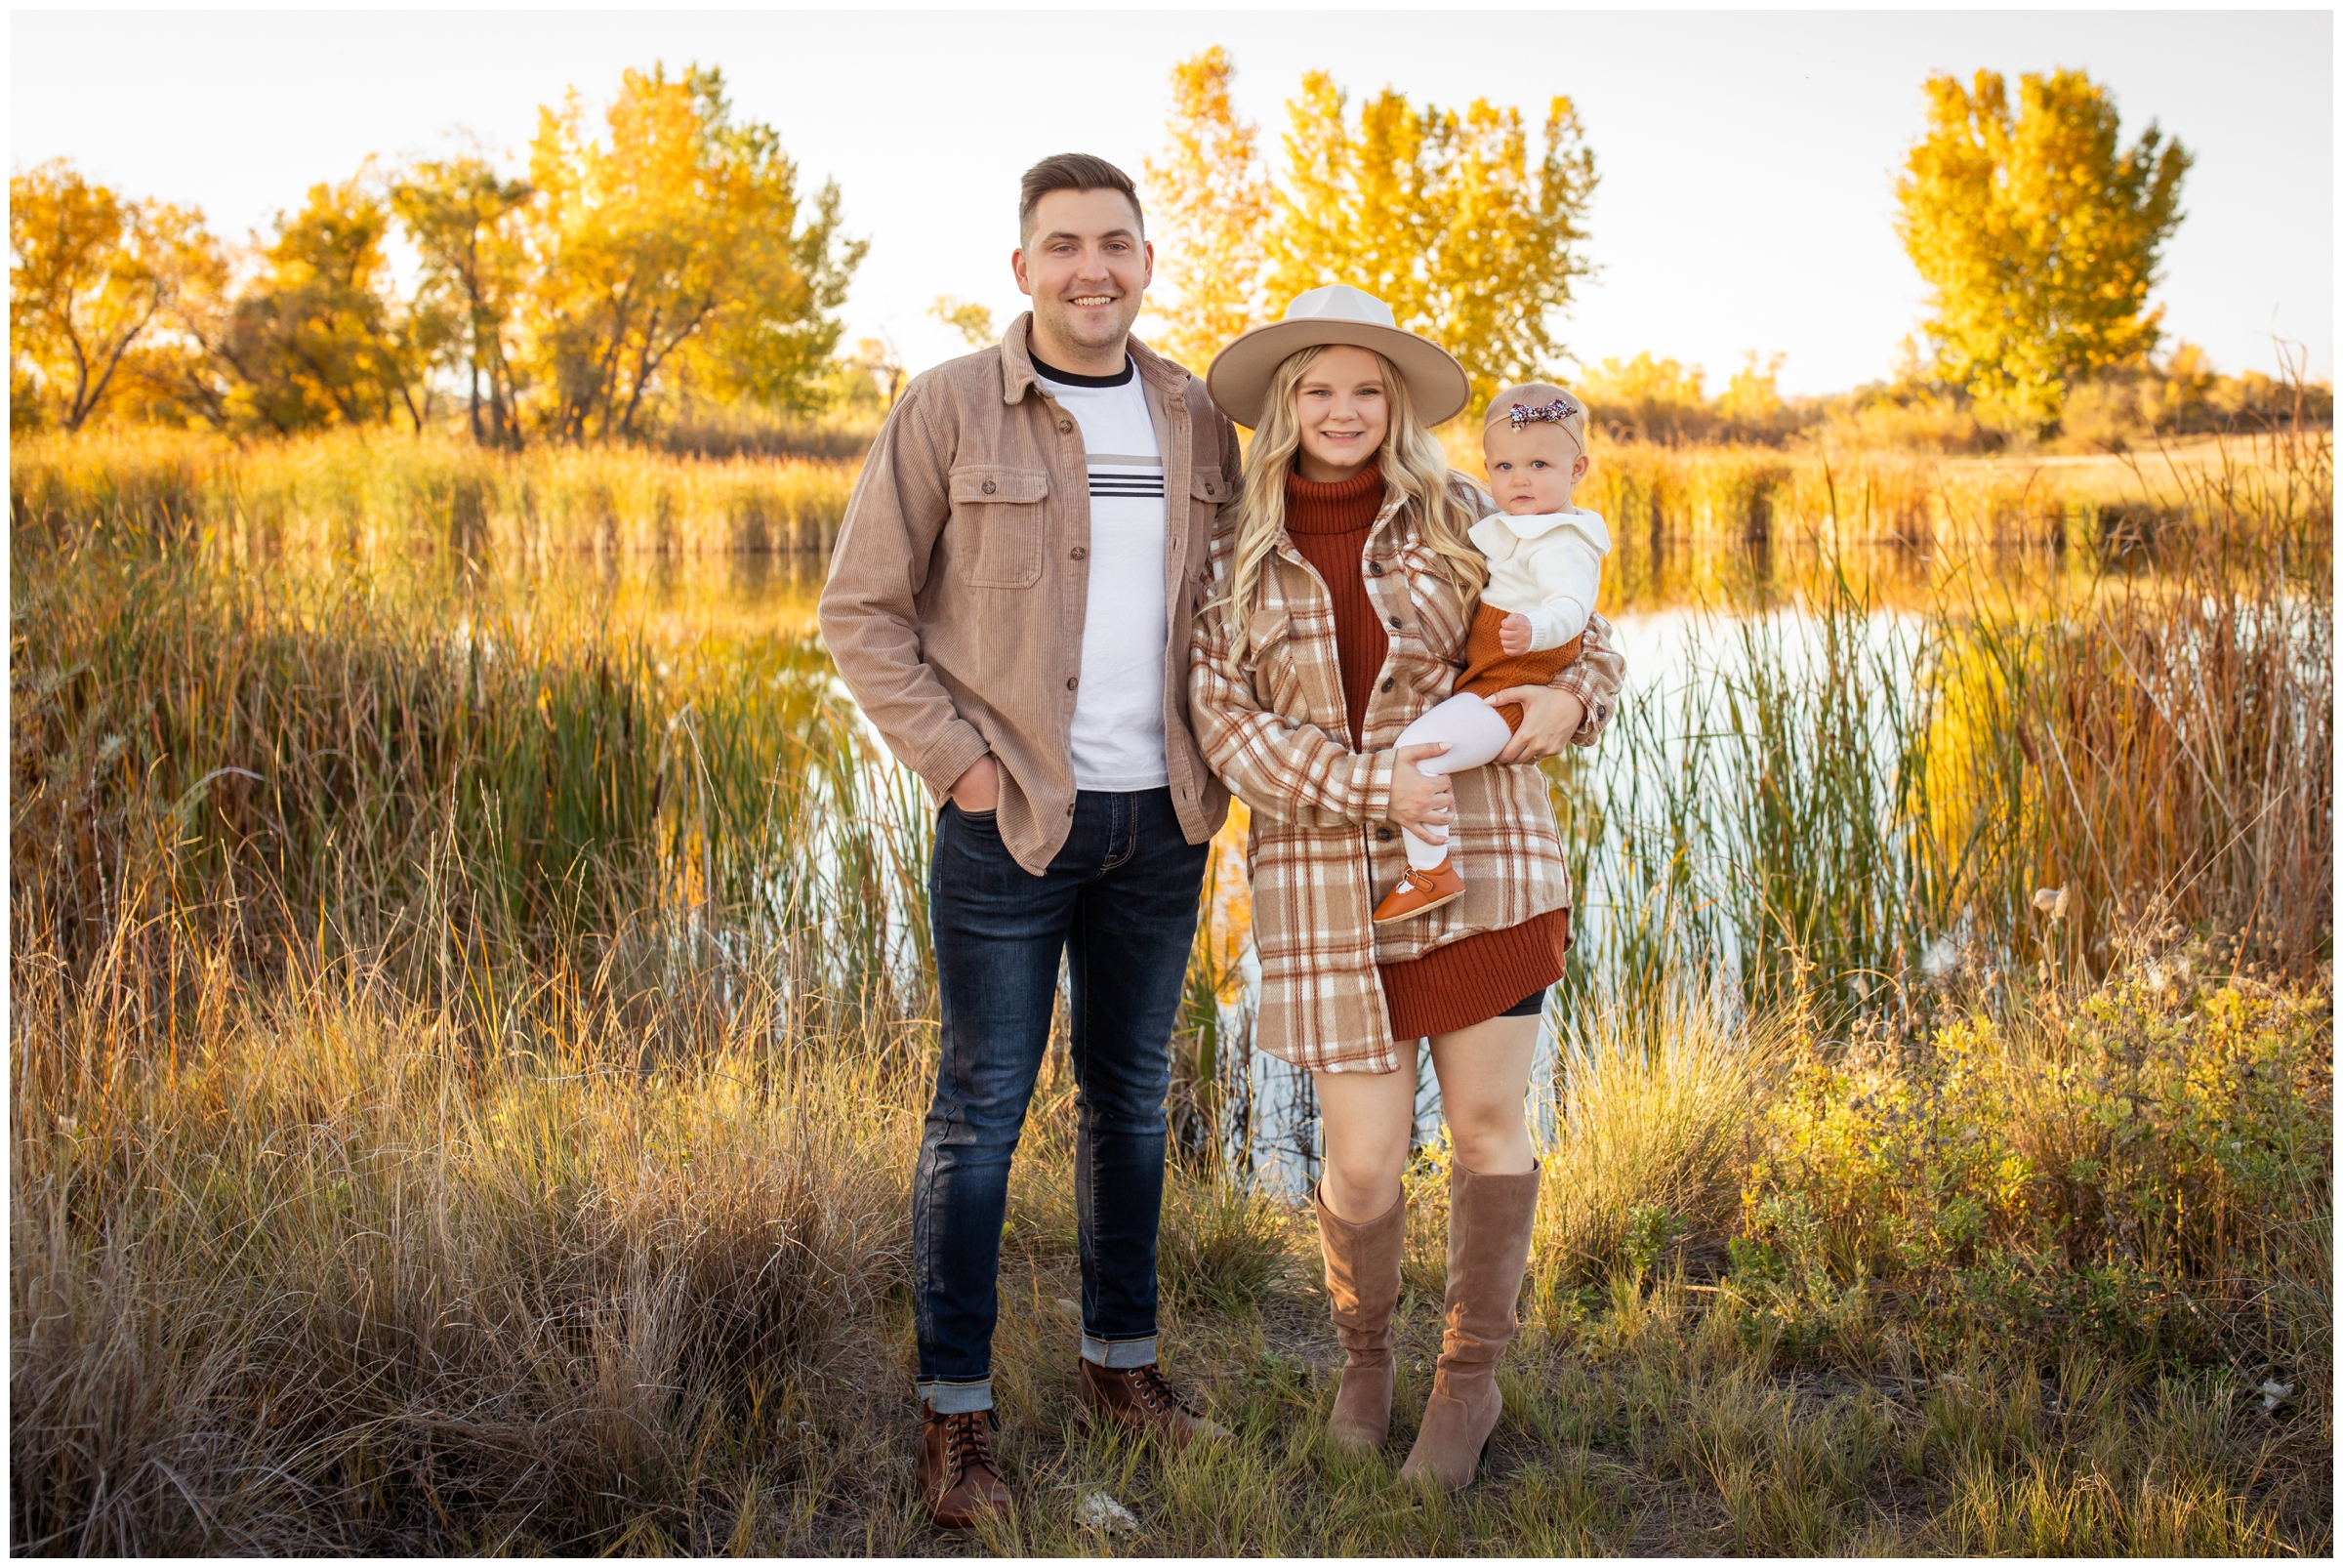 Colorful Colorado fall family portraits at Idaho Creek Park by Longmont photographer Plum Pretty Photography